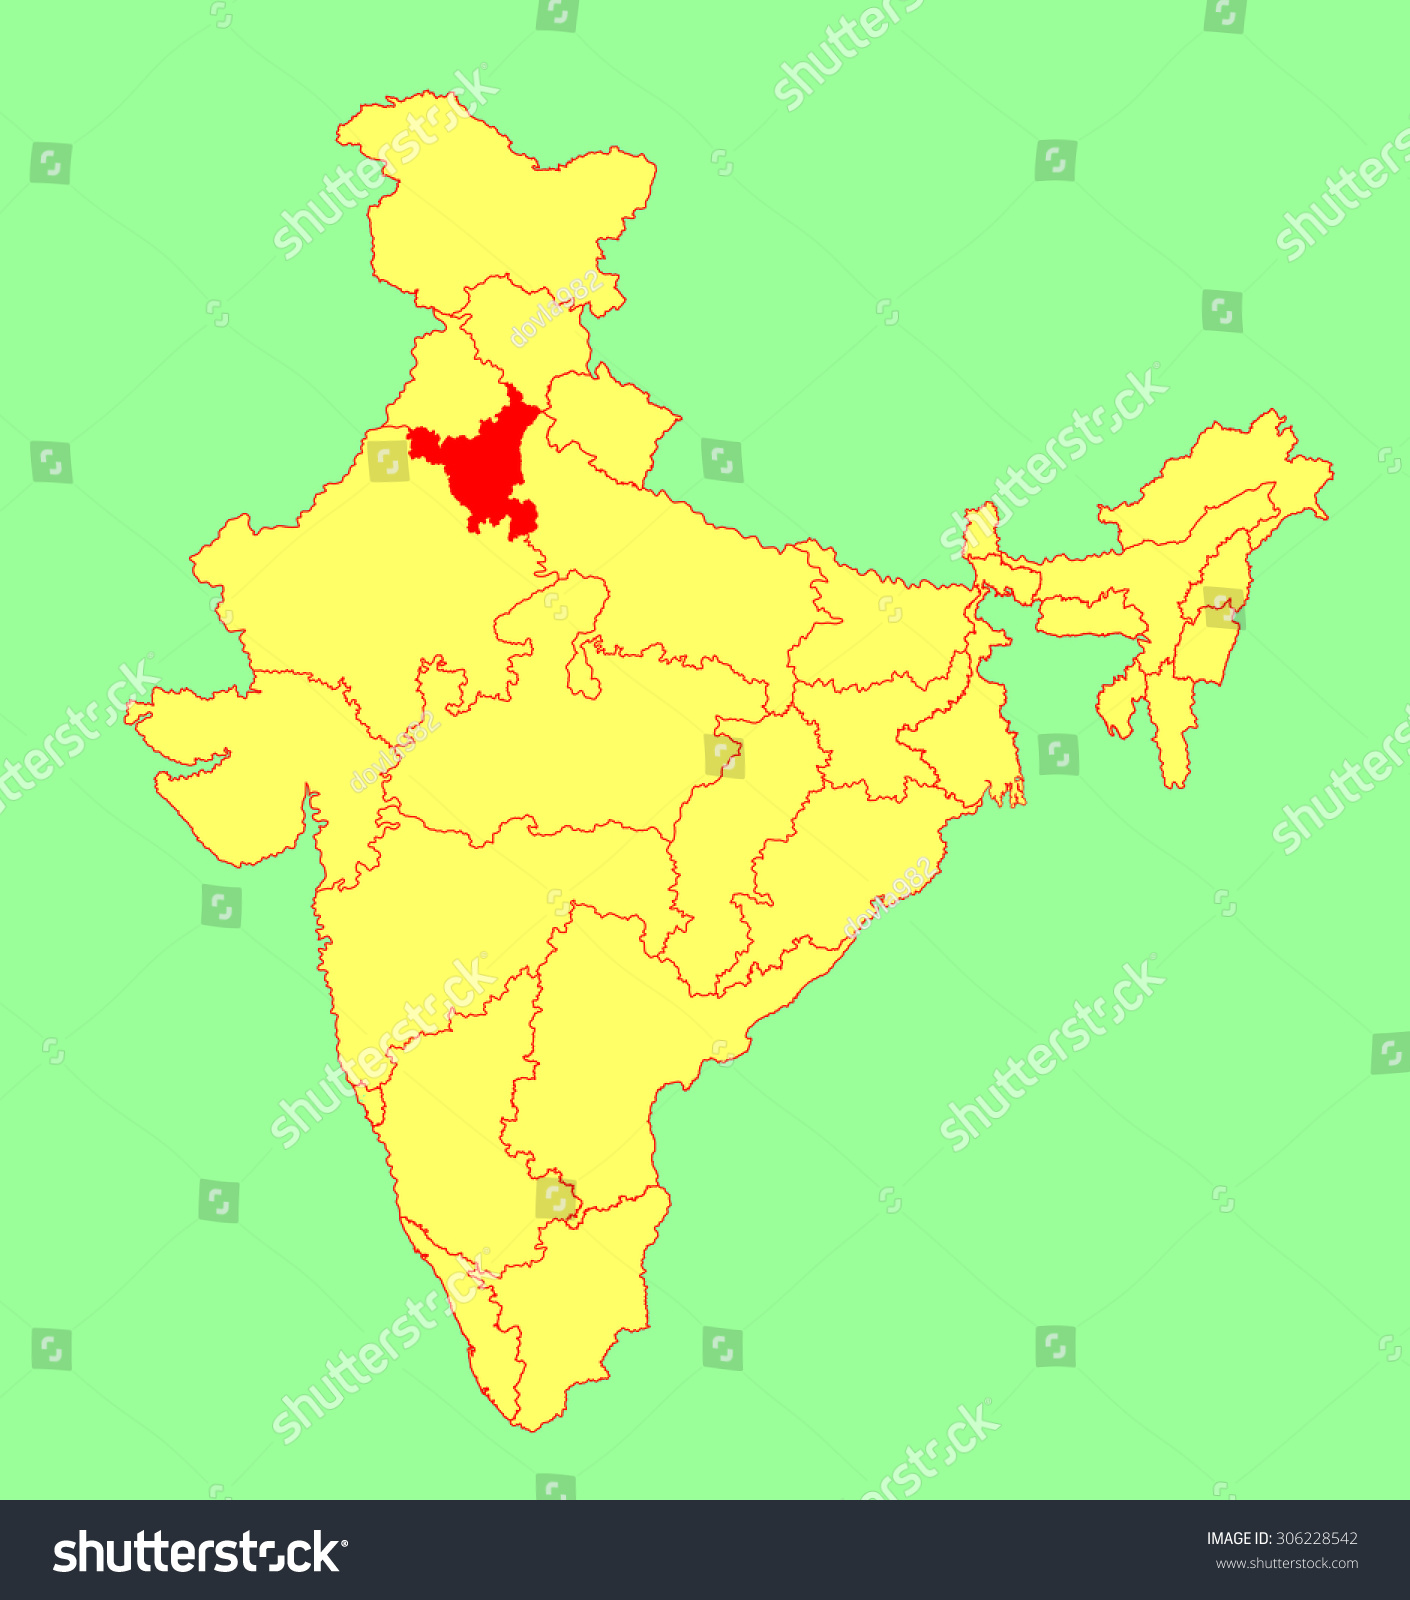 Haryana Map In India Haryana State India Vector Map Silhouette Stock Vector (Royalty Free)  306228542 | Shutterstock